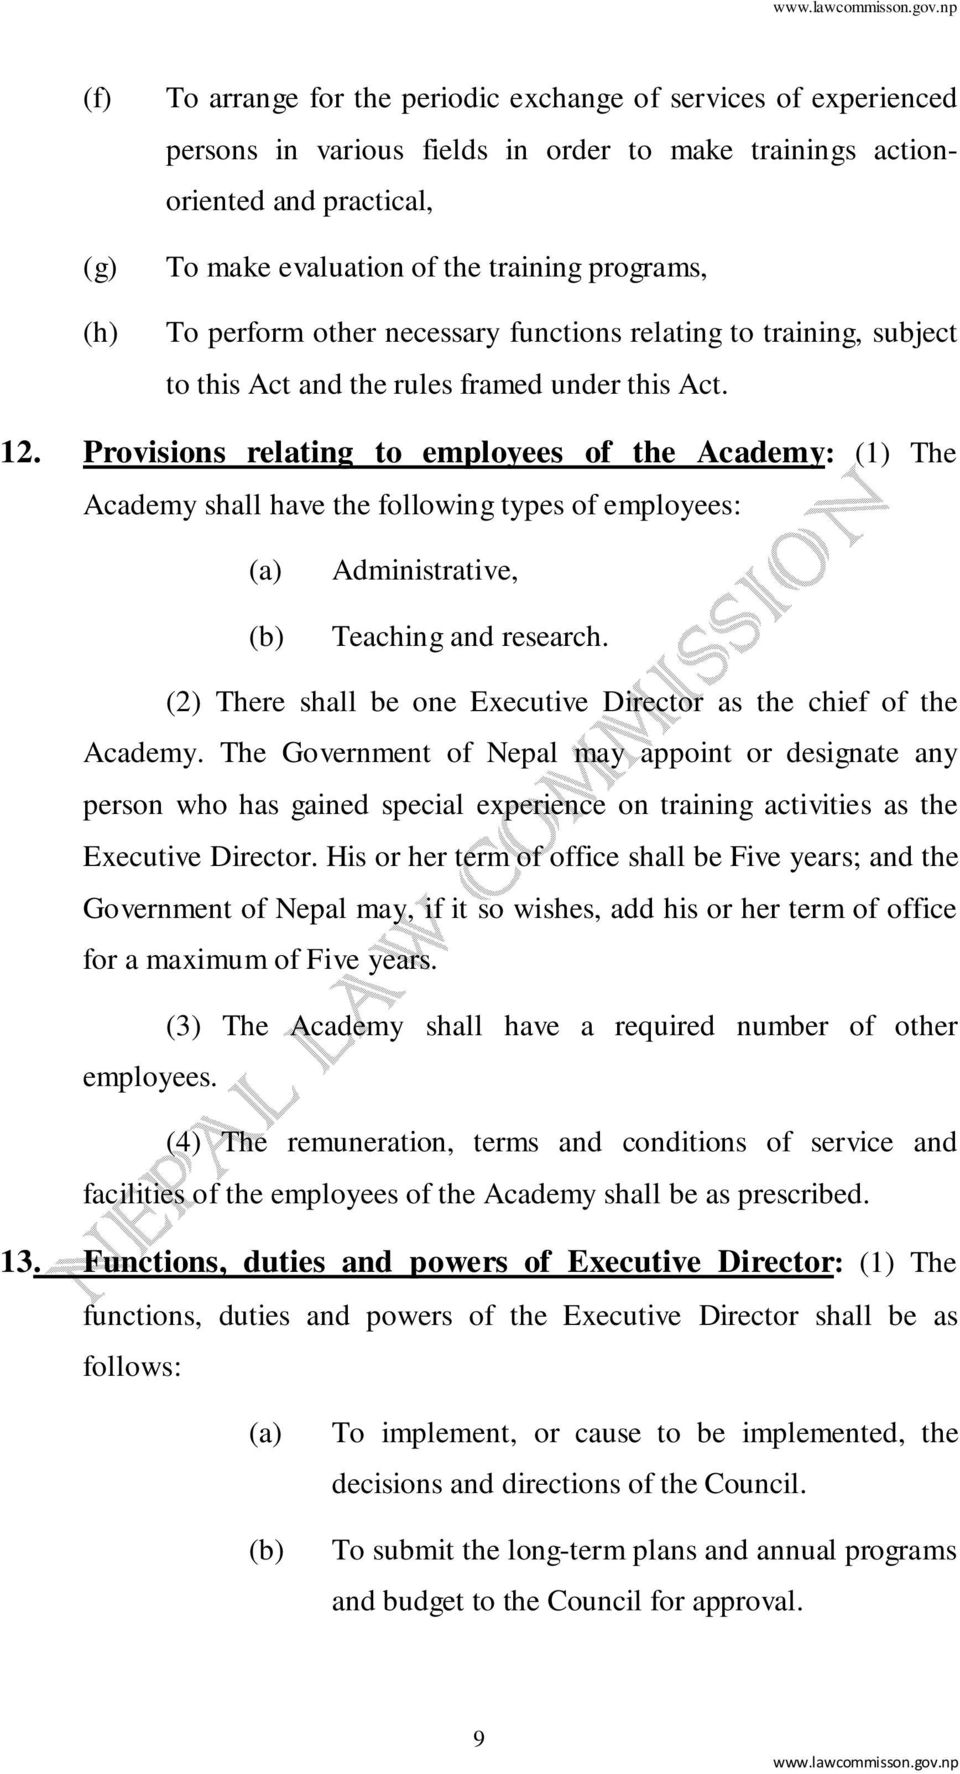 Provisions relating to employees of the Academy: (1) The Academy shall have the following types of employees: Administrative, Teaching and research.